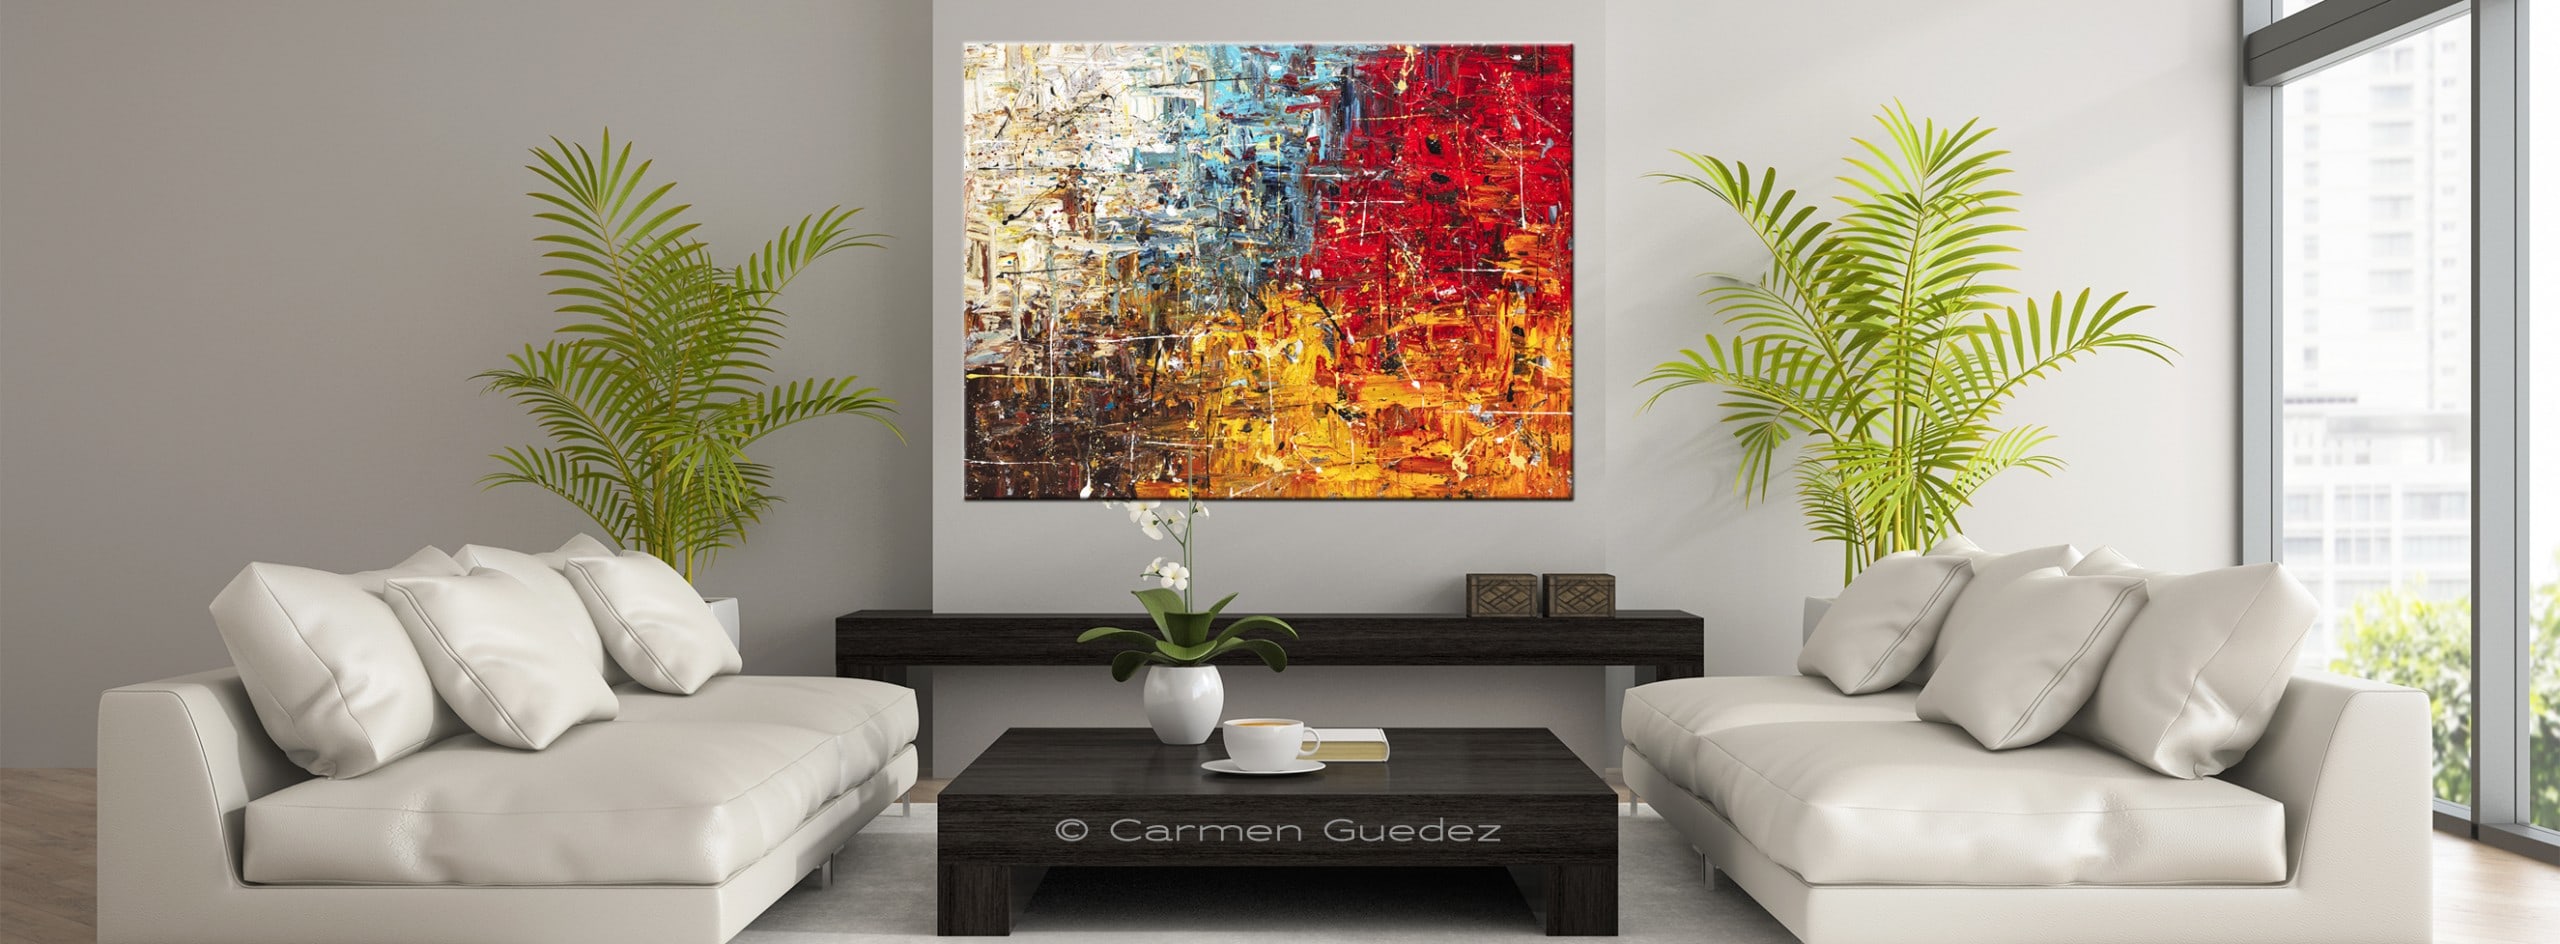 Colorful Abstract Art Painting